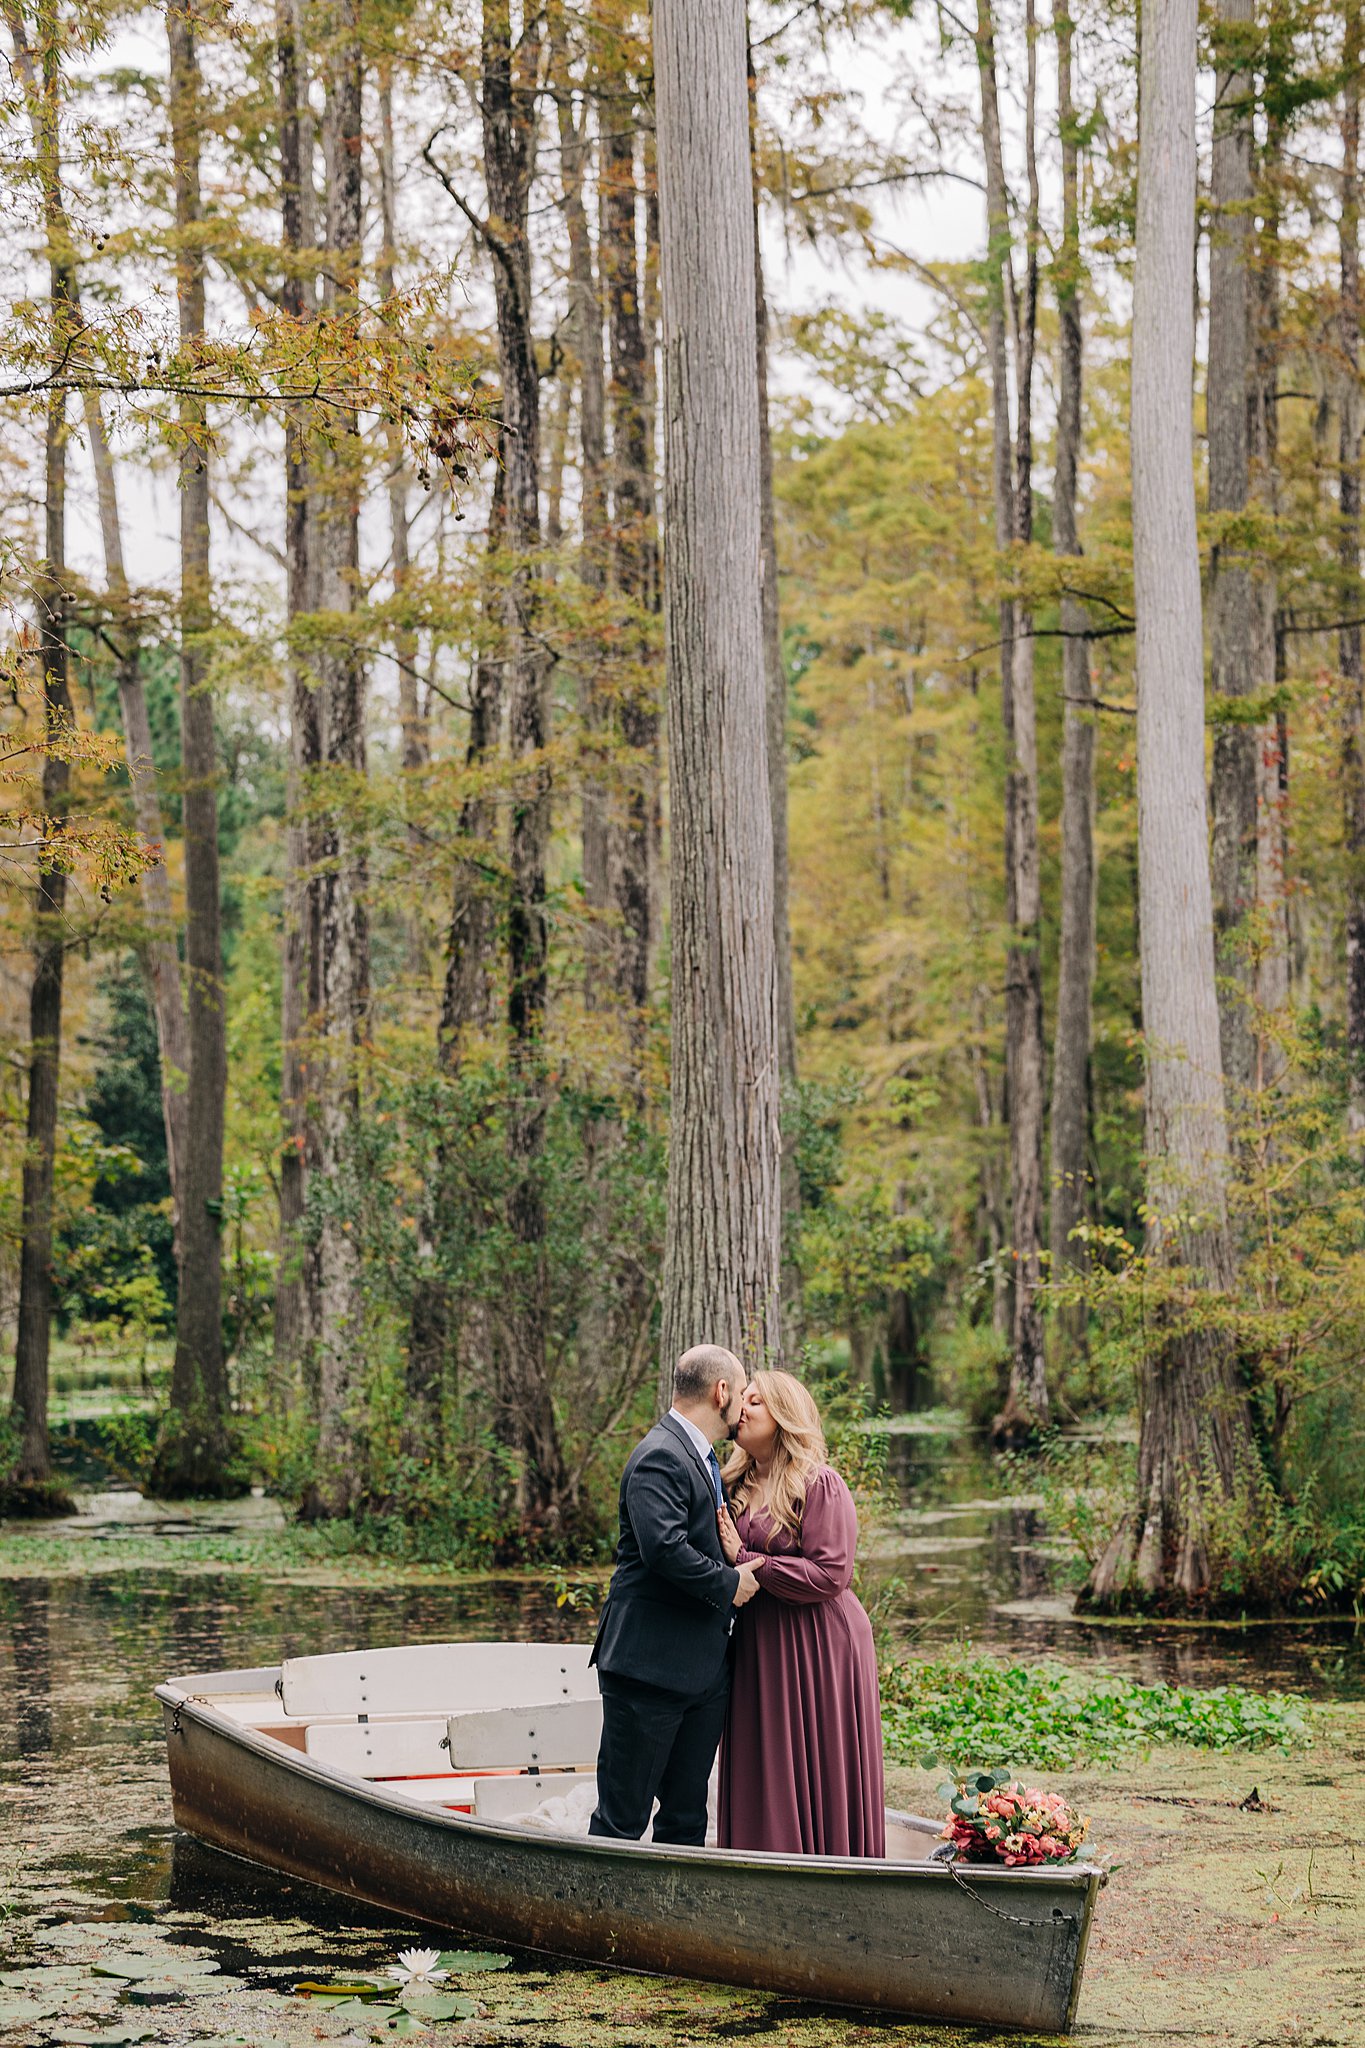 A newly engaged couple in a dark suit and pink dress kiss while standing in a boat in the cypress gardens wedding engagement venue